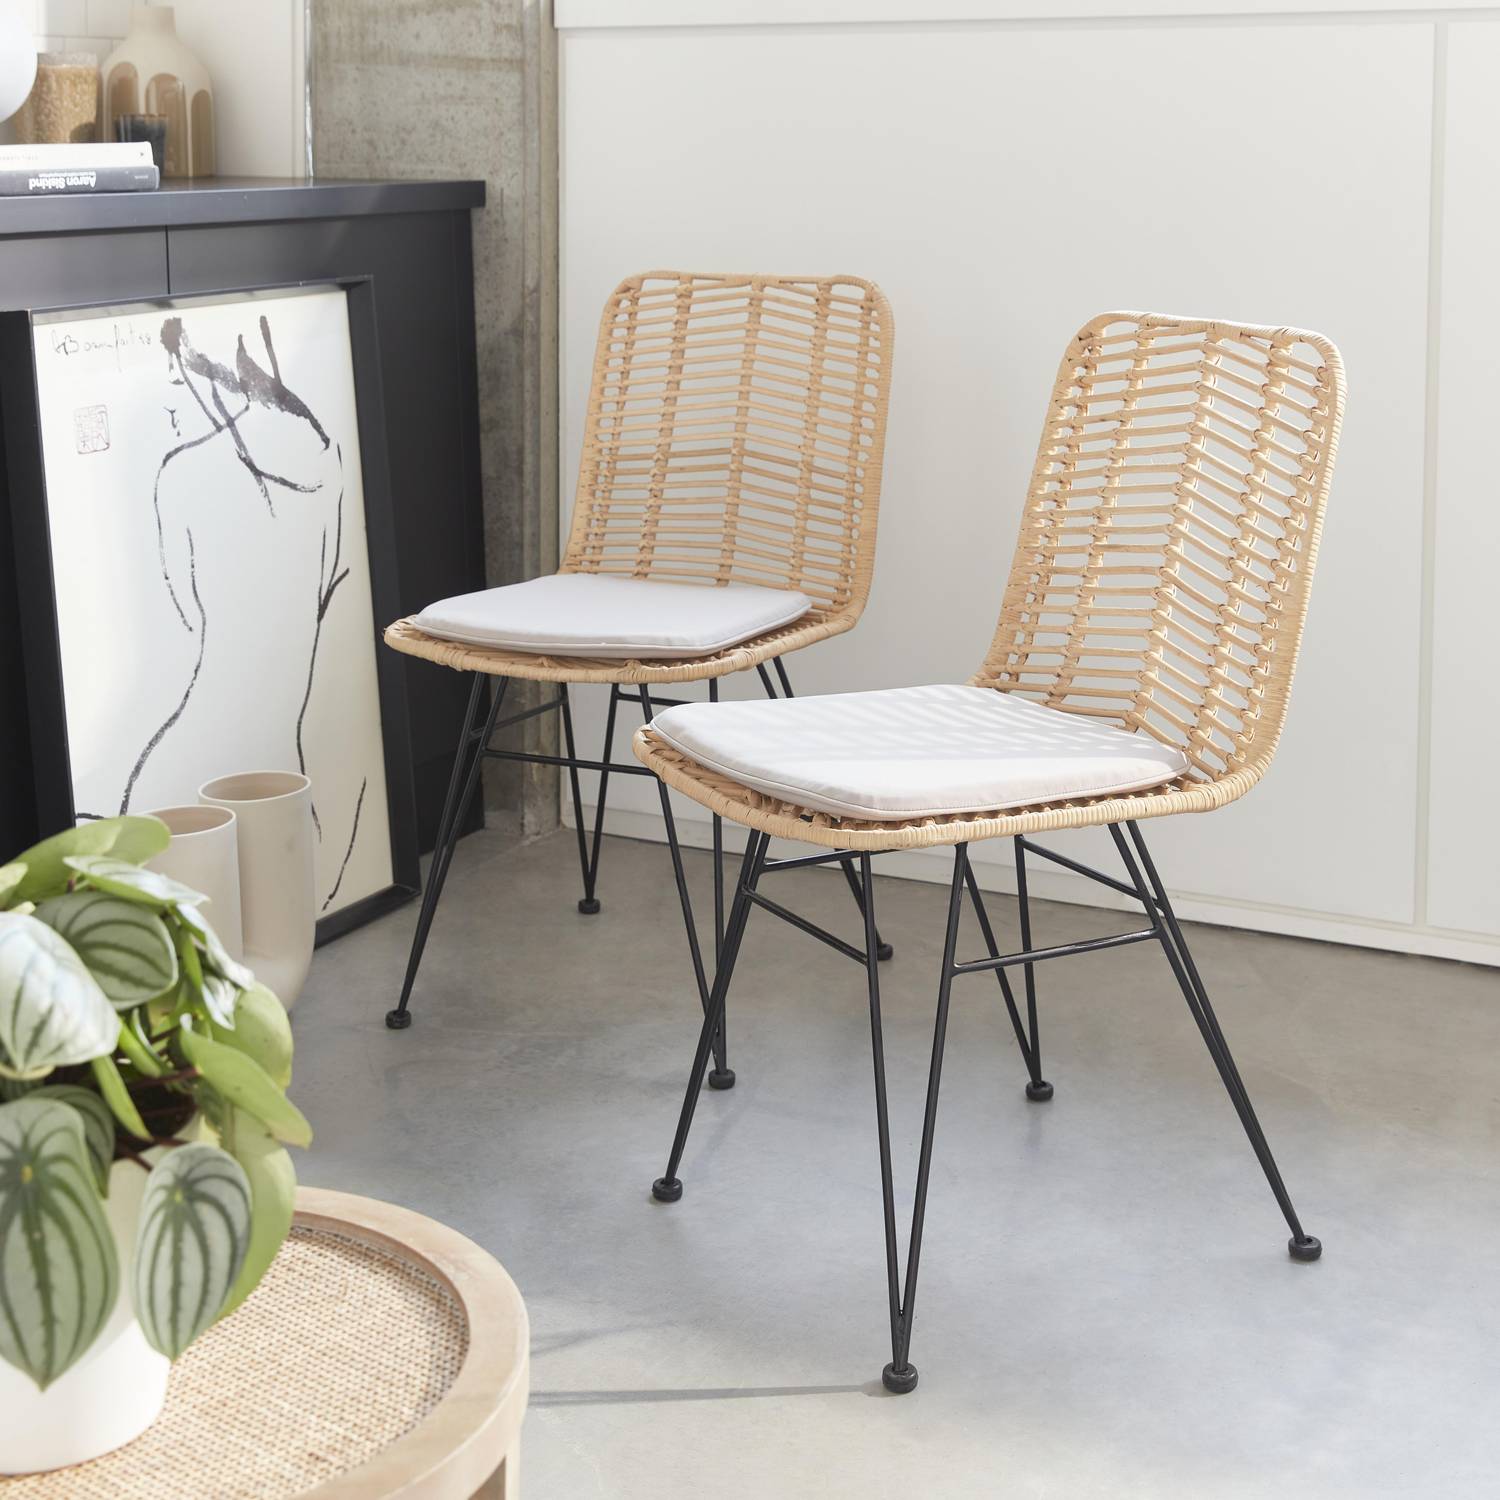 Pair of high-backed rattan dining chairs with metal legs and cushions - Cahya - Natural rattan, White cushions Photo1